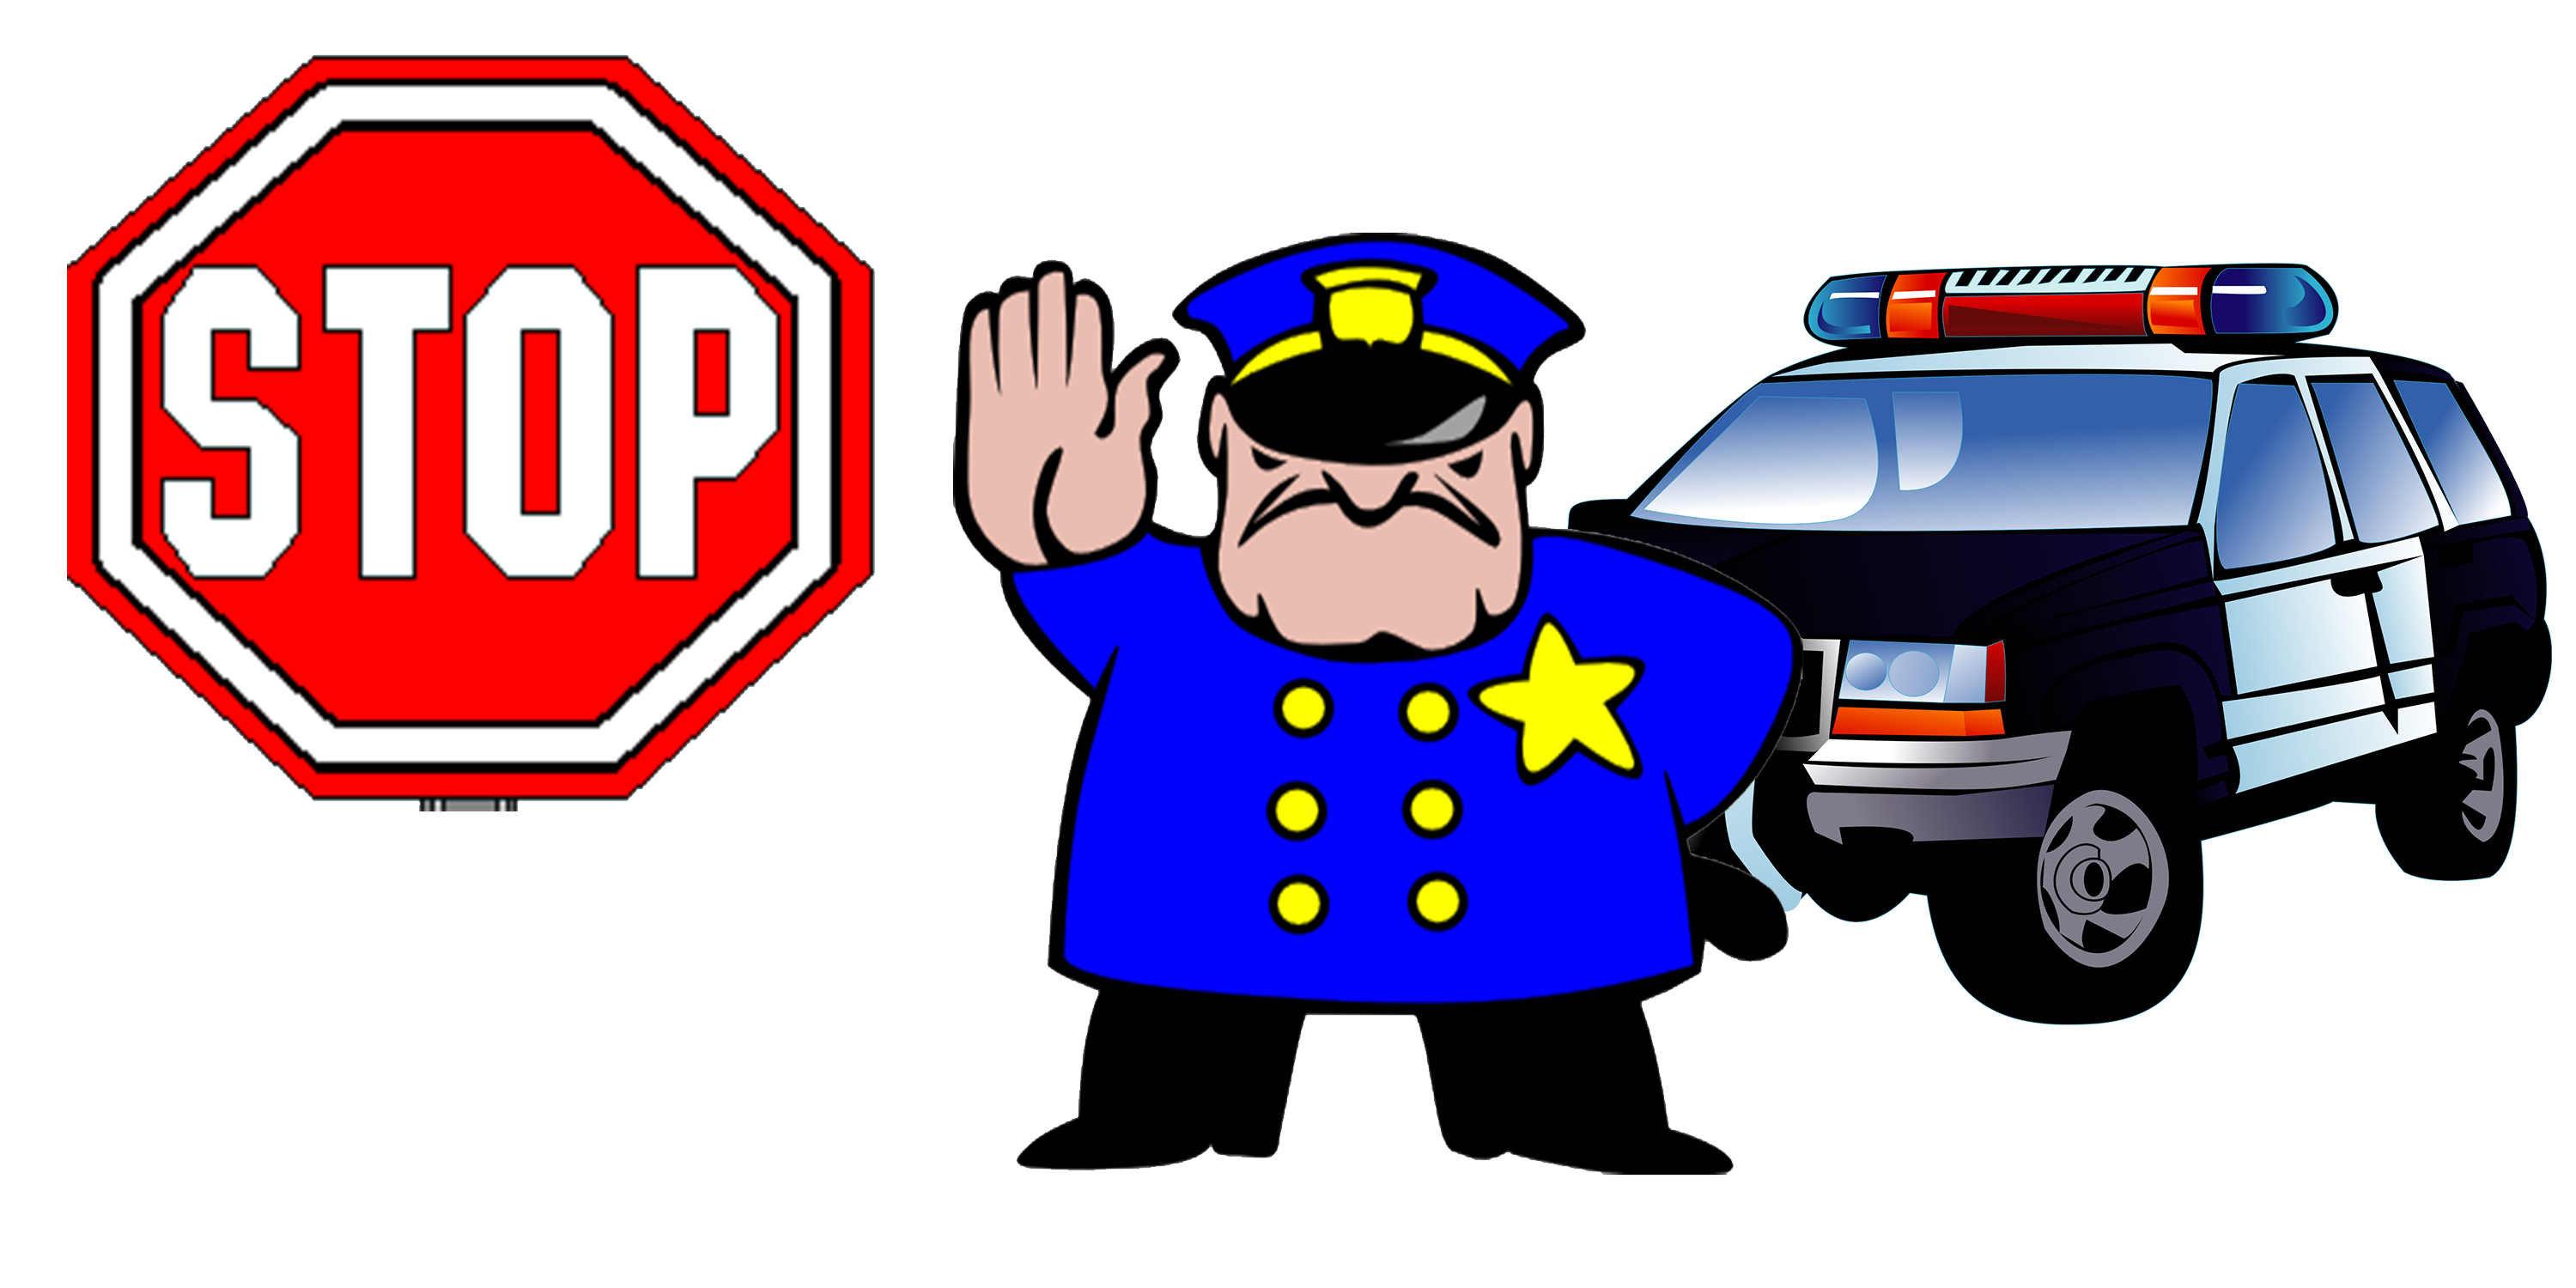 Stop sign with a police in front of a police car